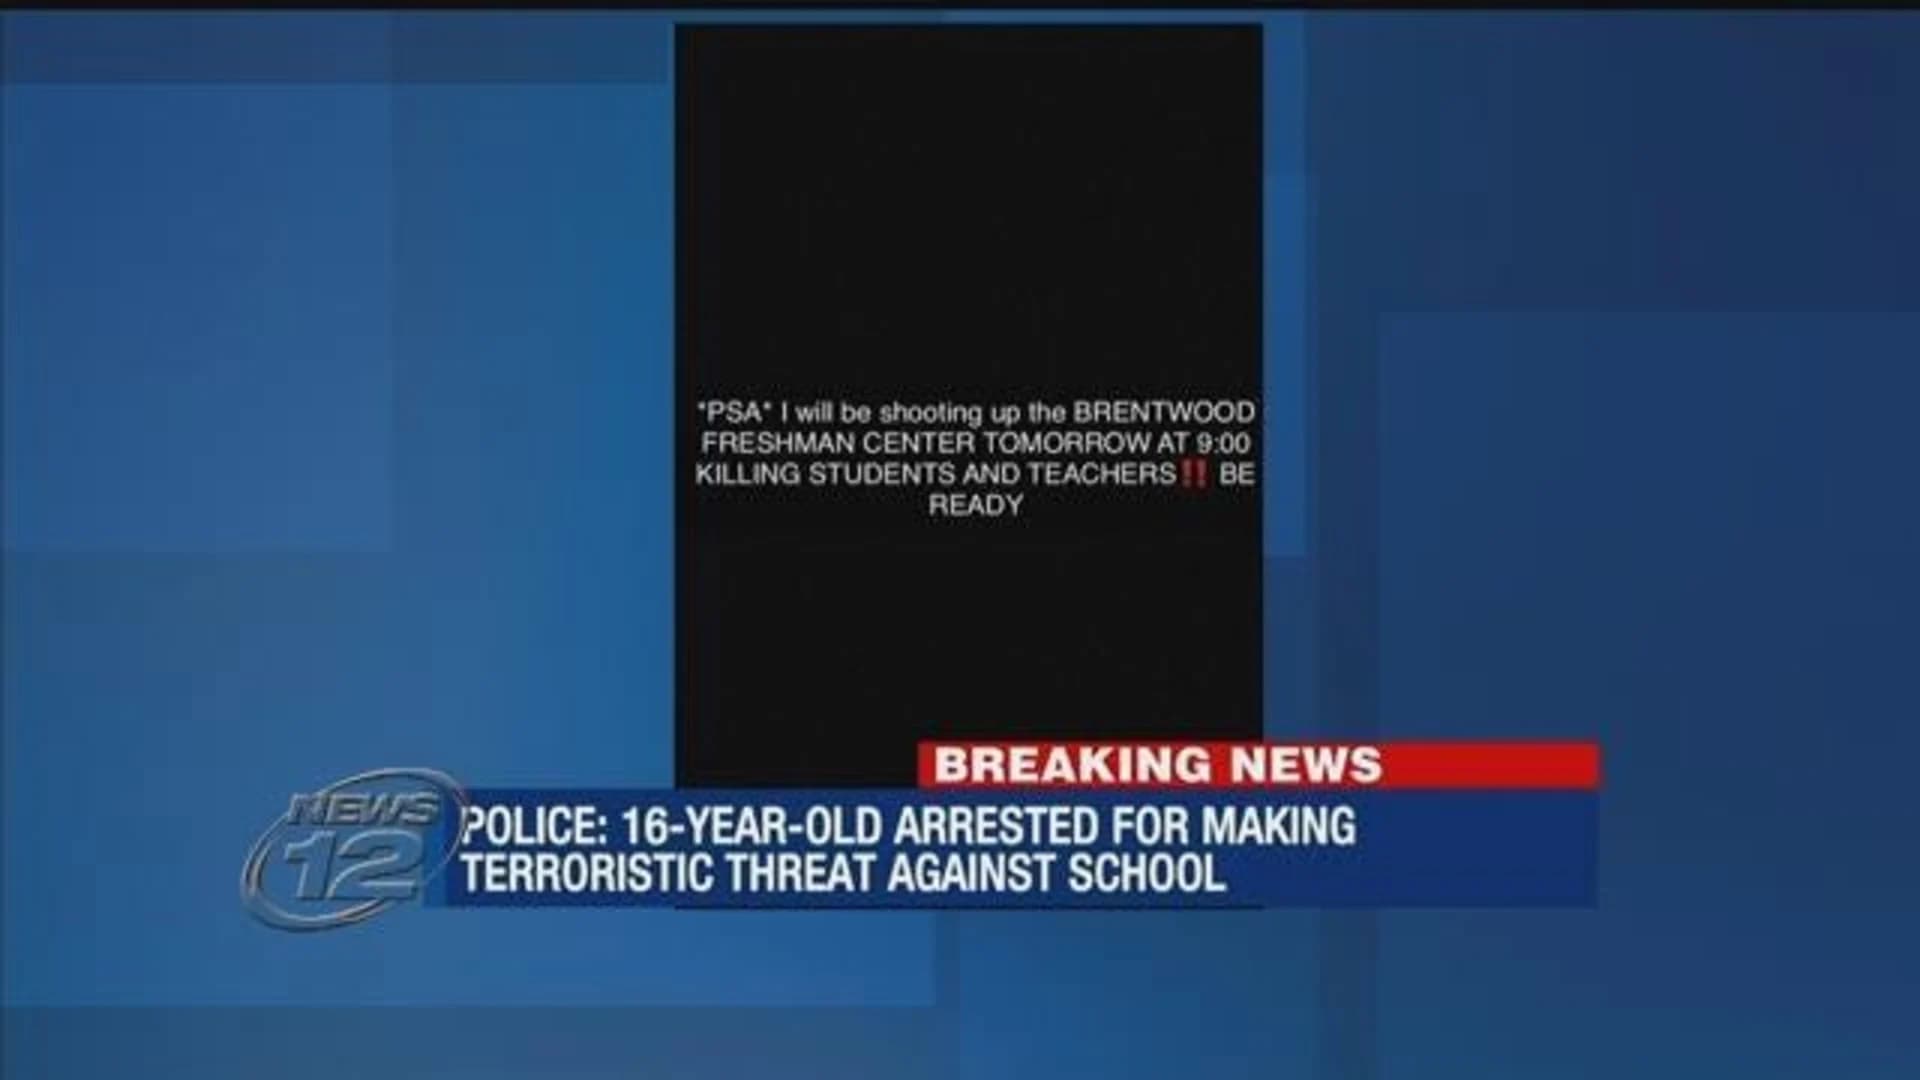 Police: Teen arrested for making terroristic threat against Brentwood school